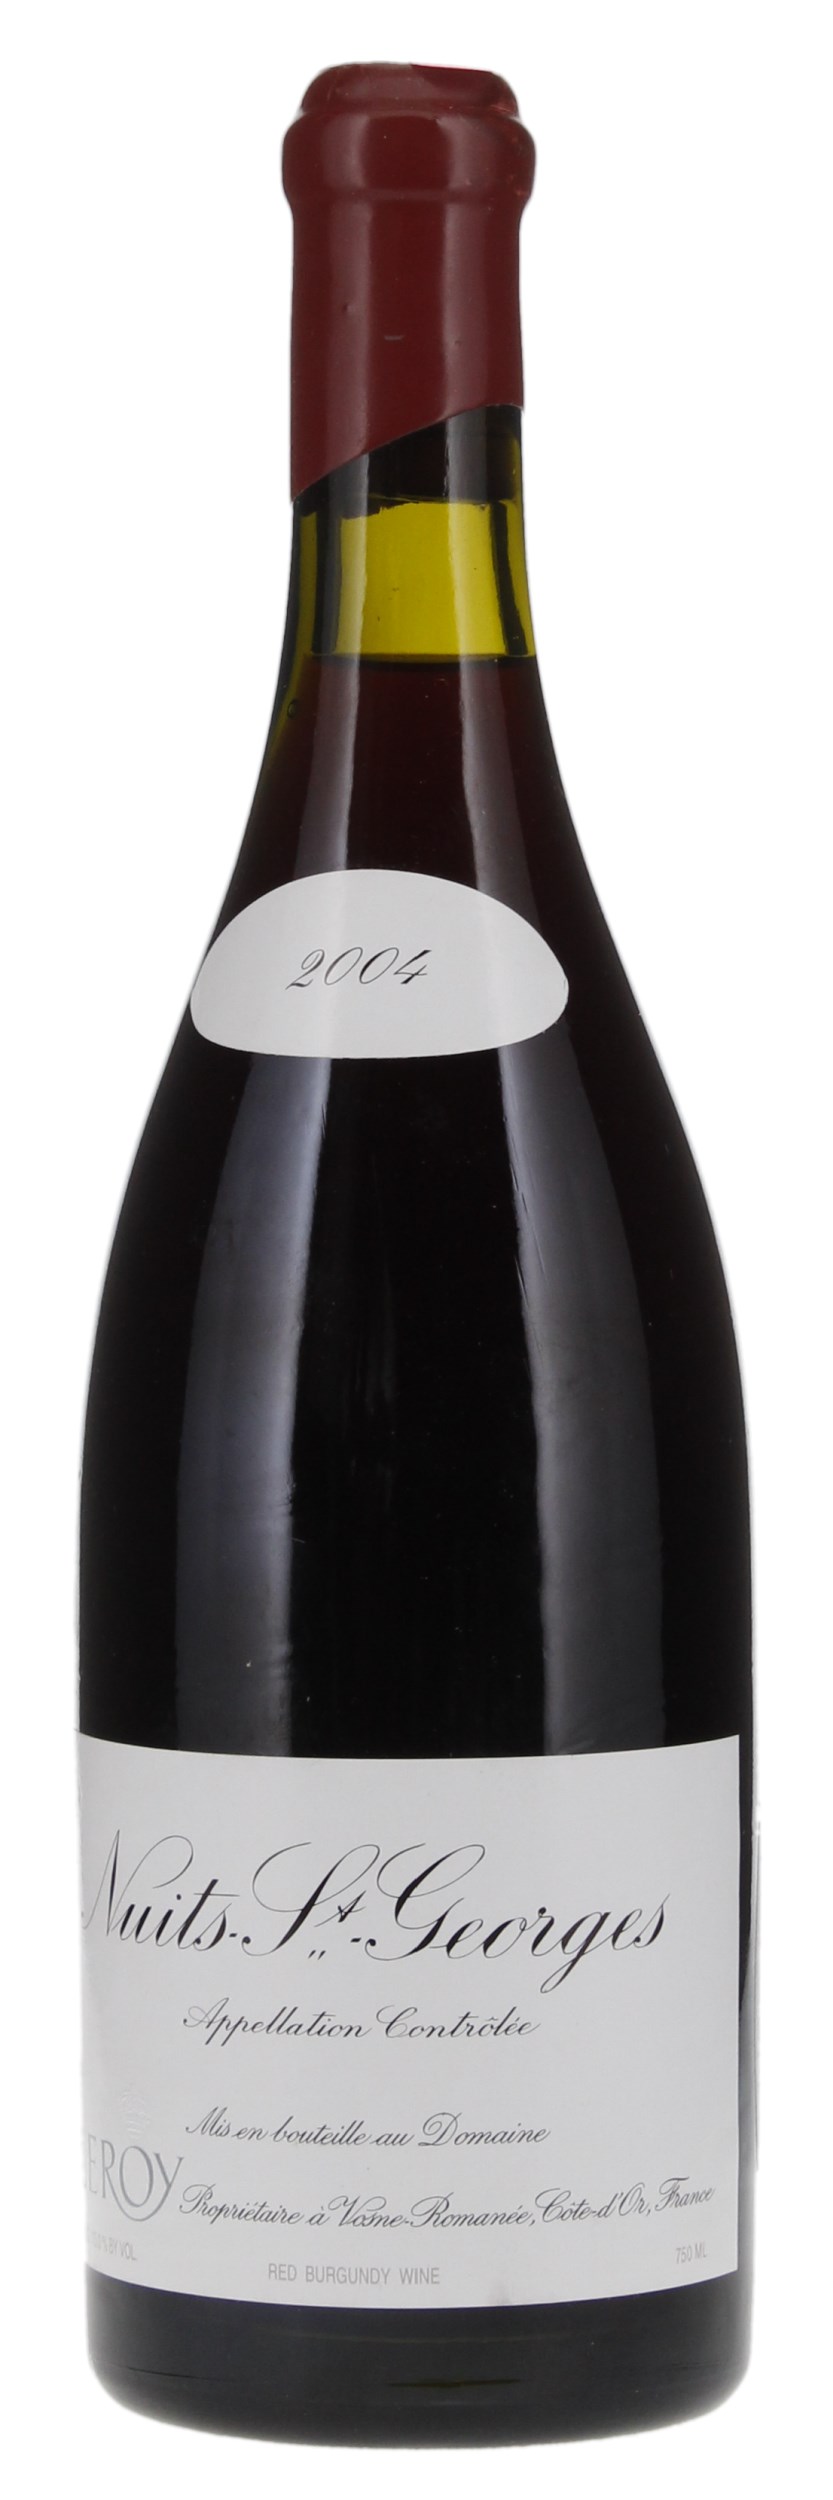 2004 Domaine Leroy Nuits-St.-Georges, 750ml